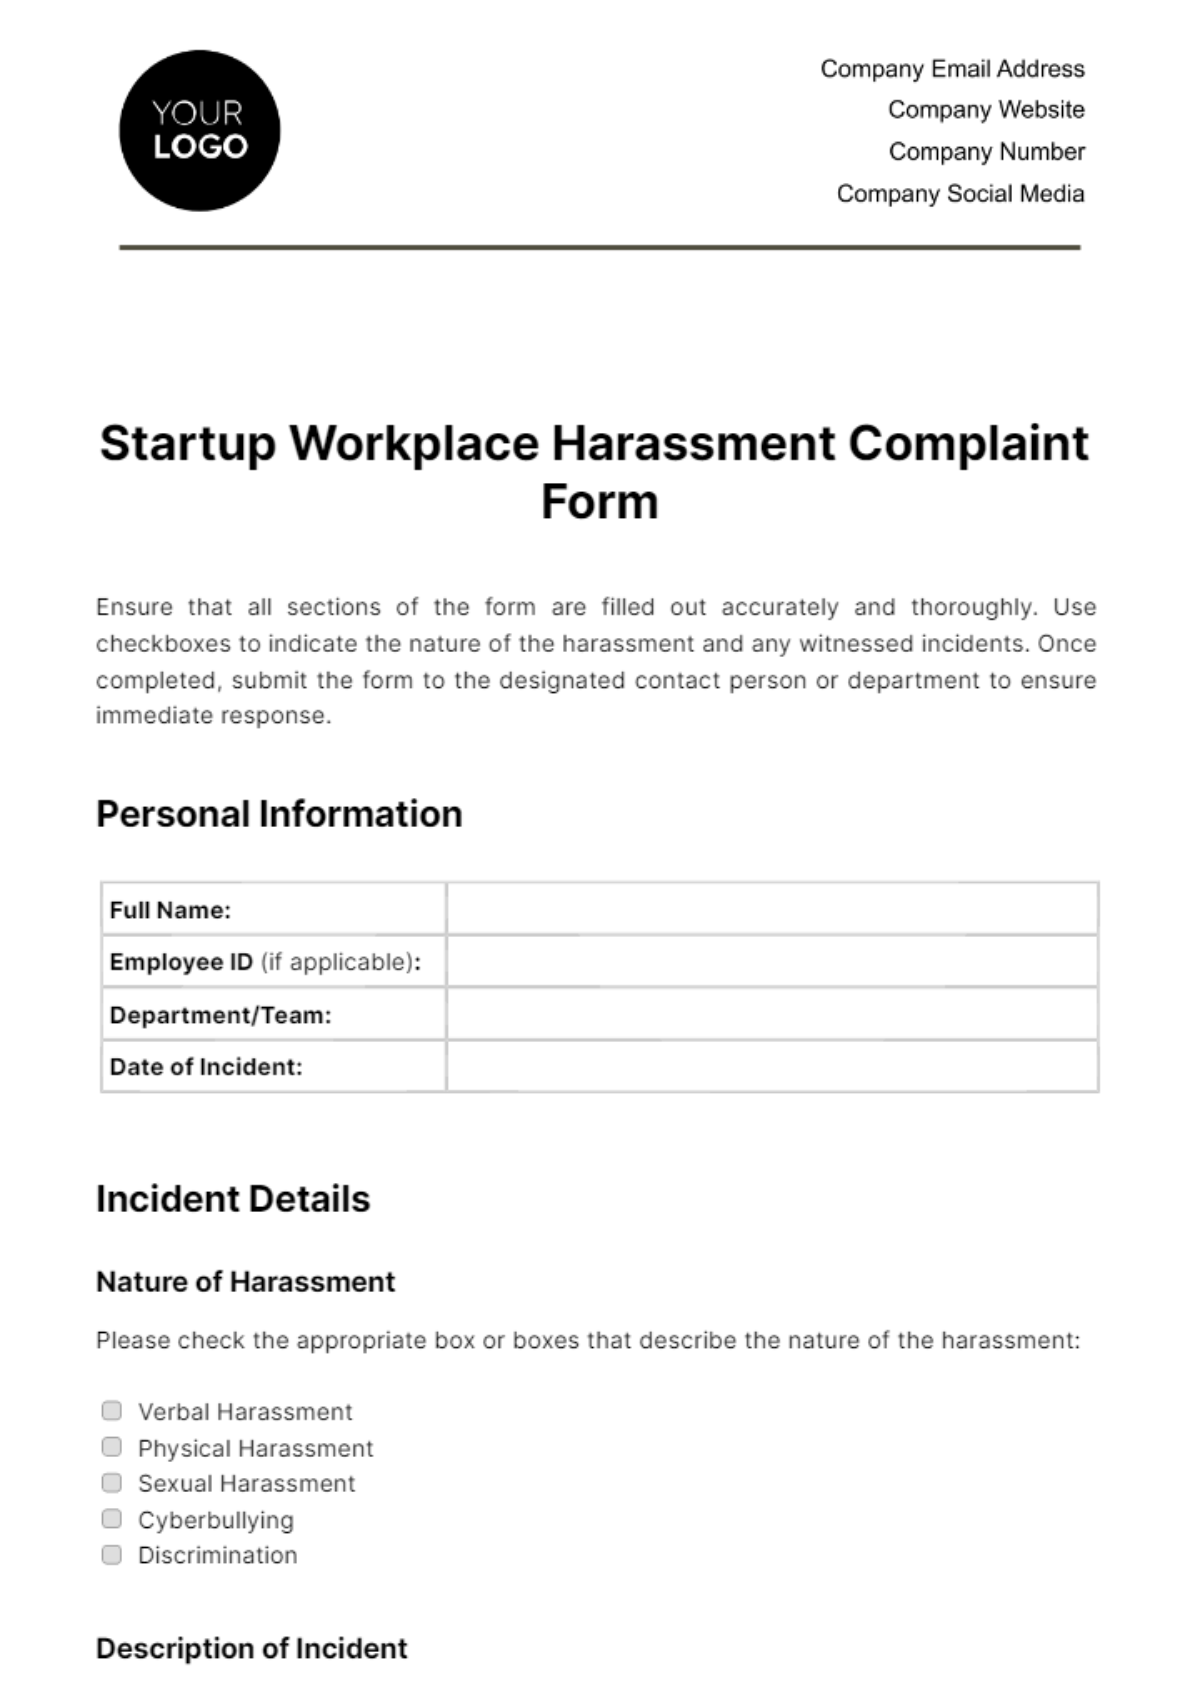 Startup Workplace Harassment Complaint Form Template